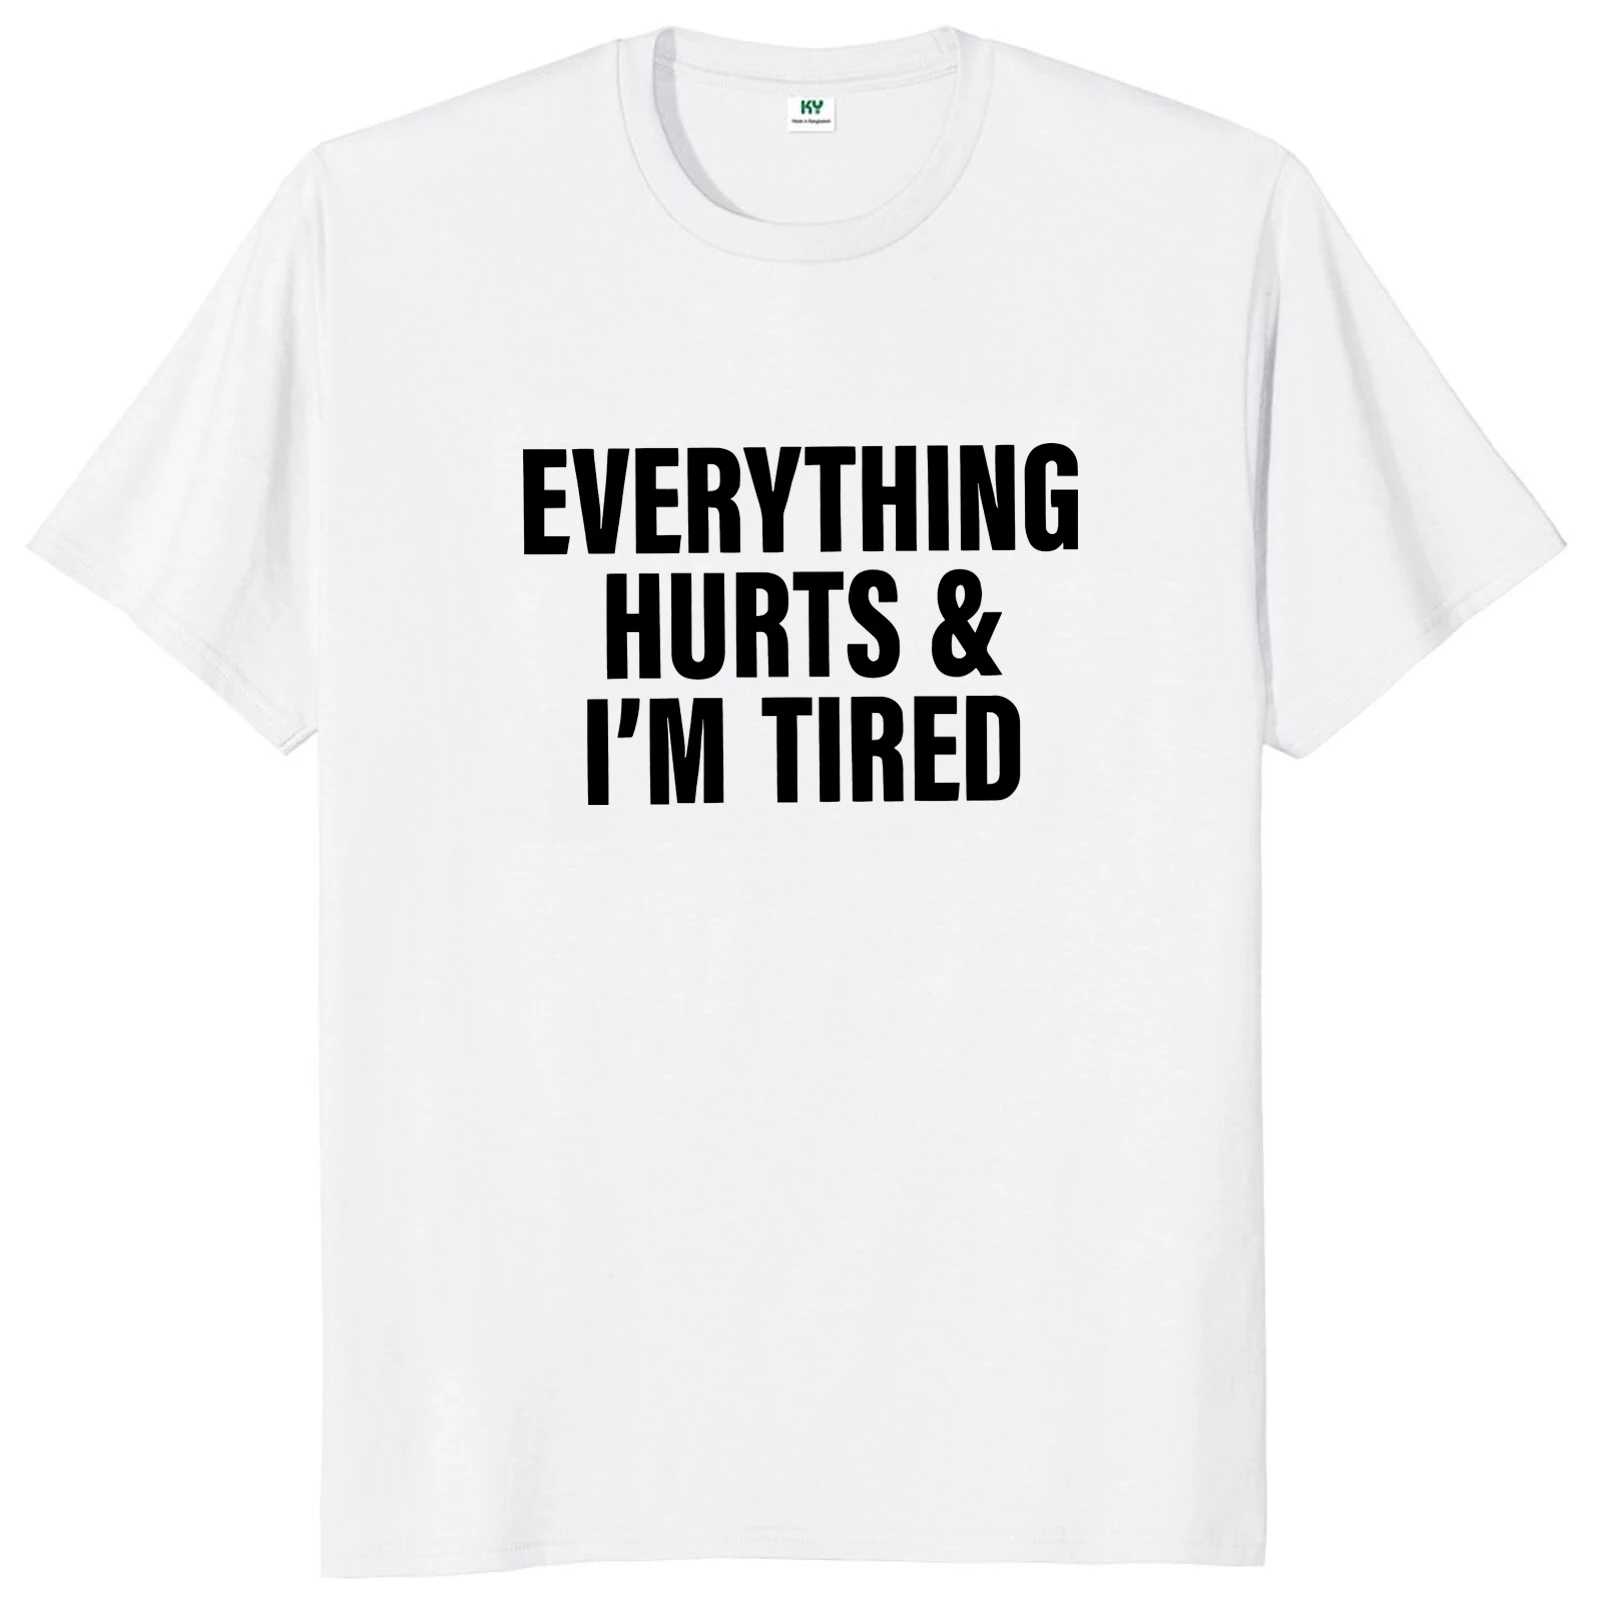 Everthing Hurts And Im Tired T Shirt Funny Fitness Gym Humor Gift Short Sleeve 100% Cotton Soft Unisex O-neck T-shirts EU Size